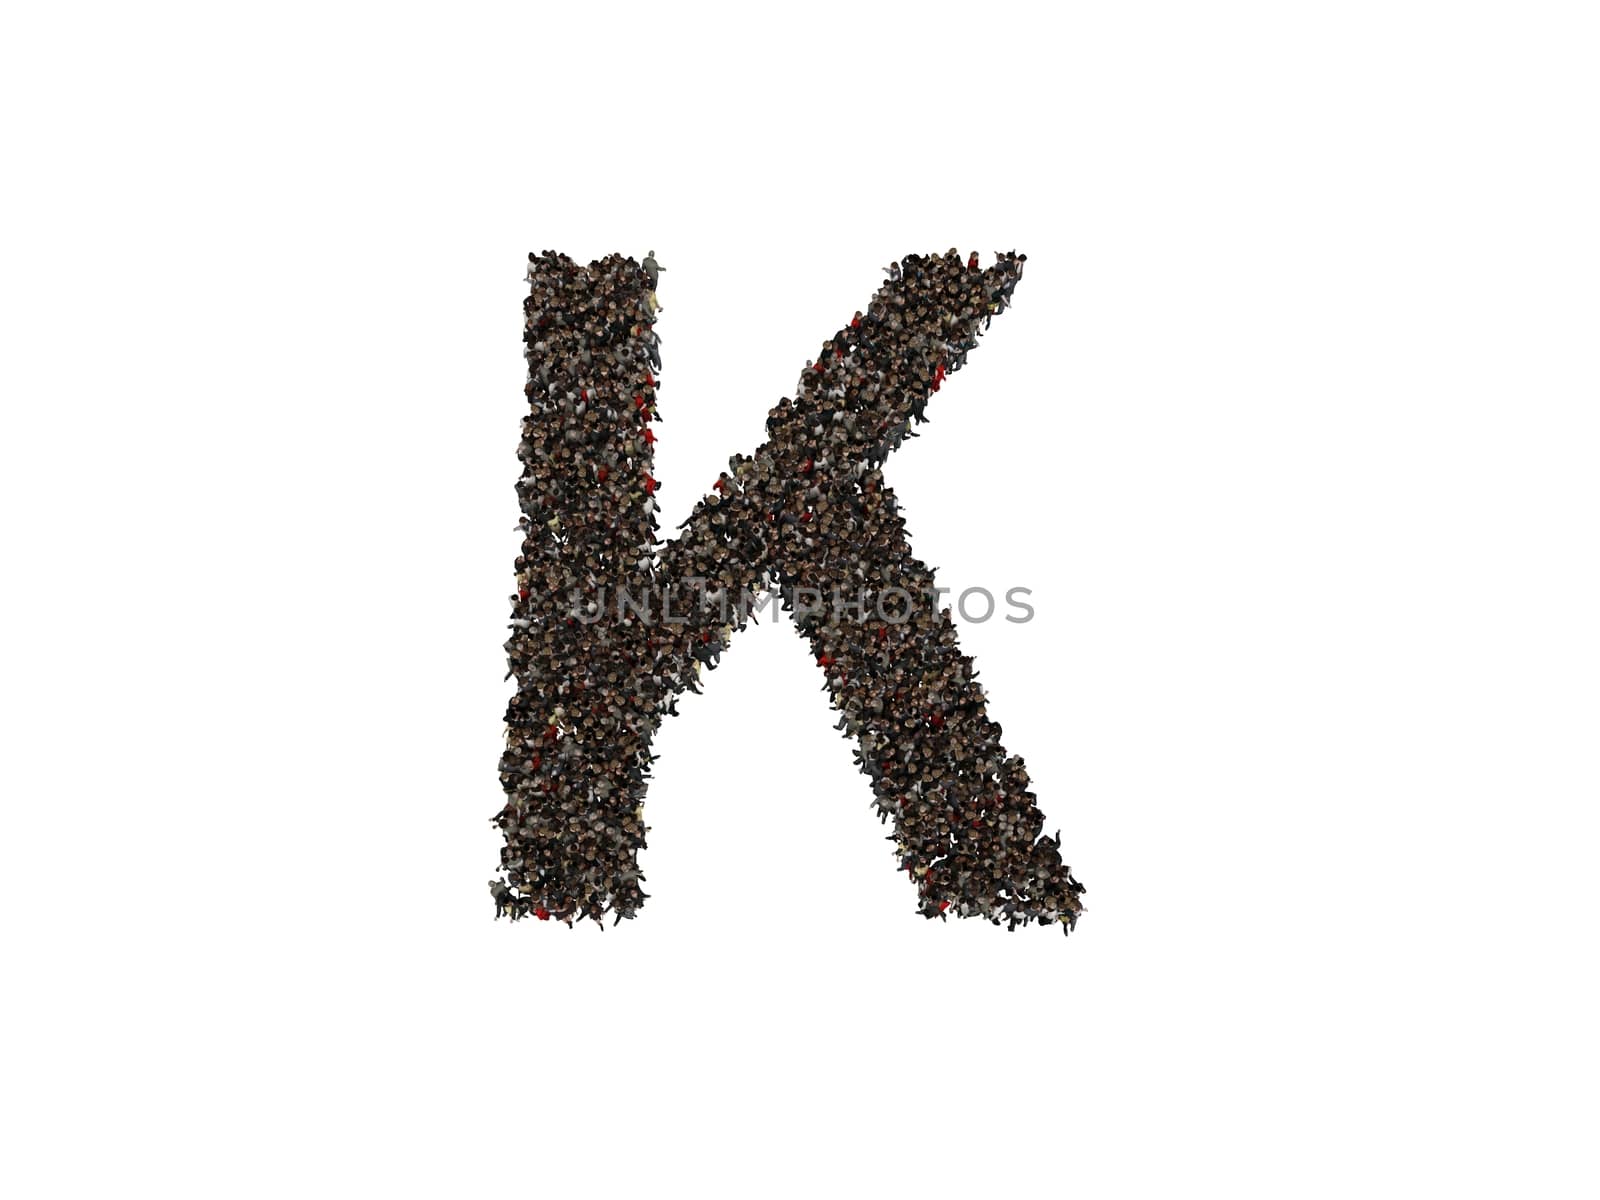 3d characters forming the letter K isolated on a white background seen from above